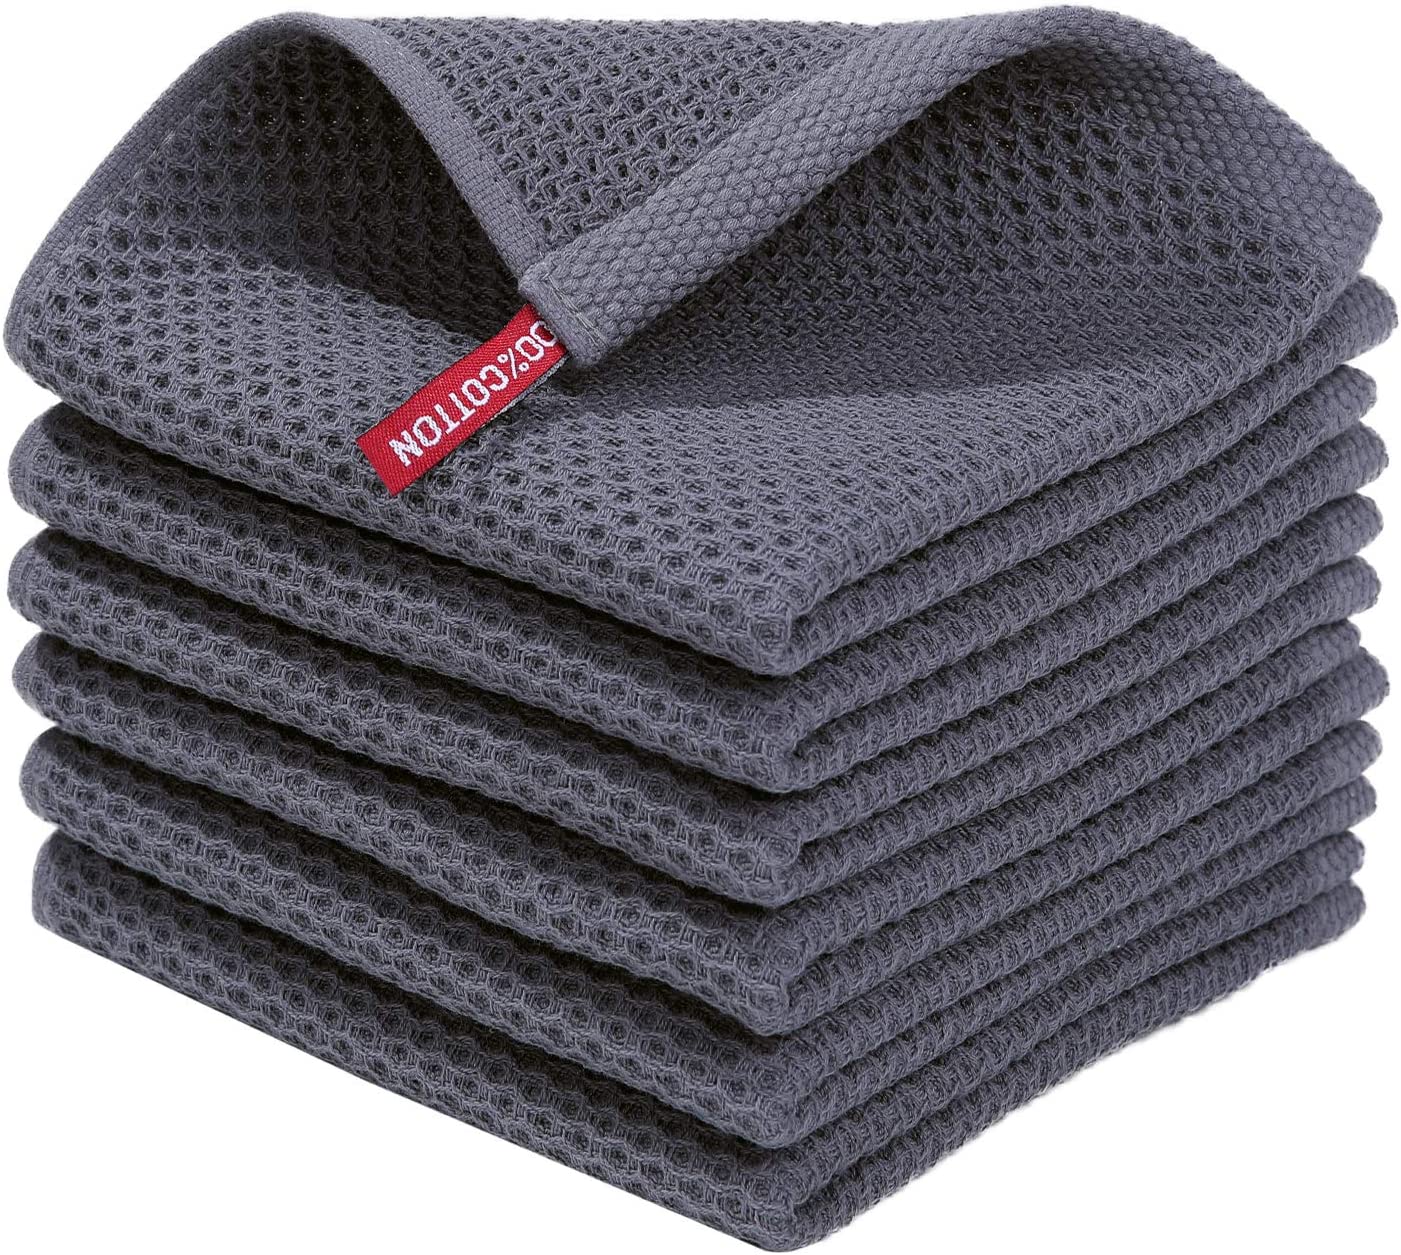 100% Cotton Waffle Weave Kitchen Dish Cloths, Ultra Soft Absorbent Quick Drying Dish Towels, 12x12 Inches, 6-Pack, Dark Grey